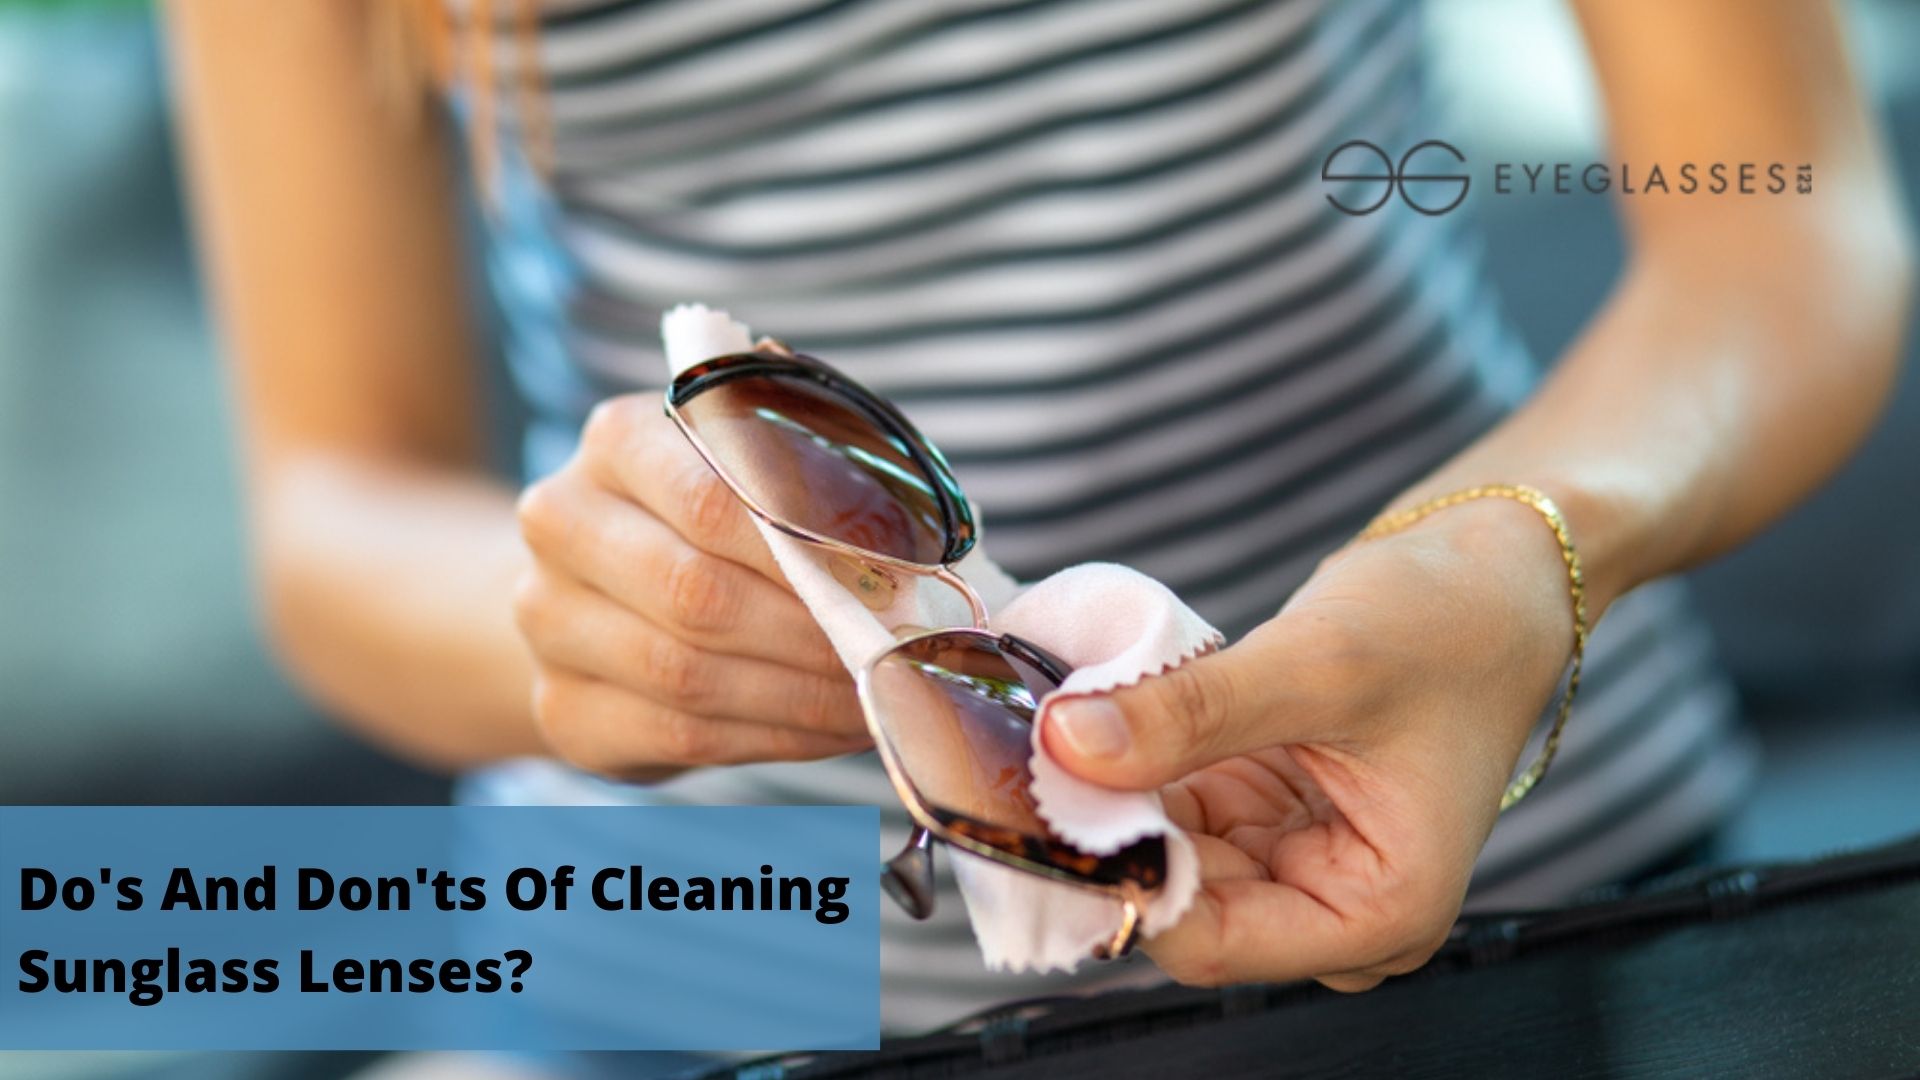 Do's And Don'ts Of Cleaning Sunglass Lenses